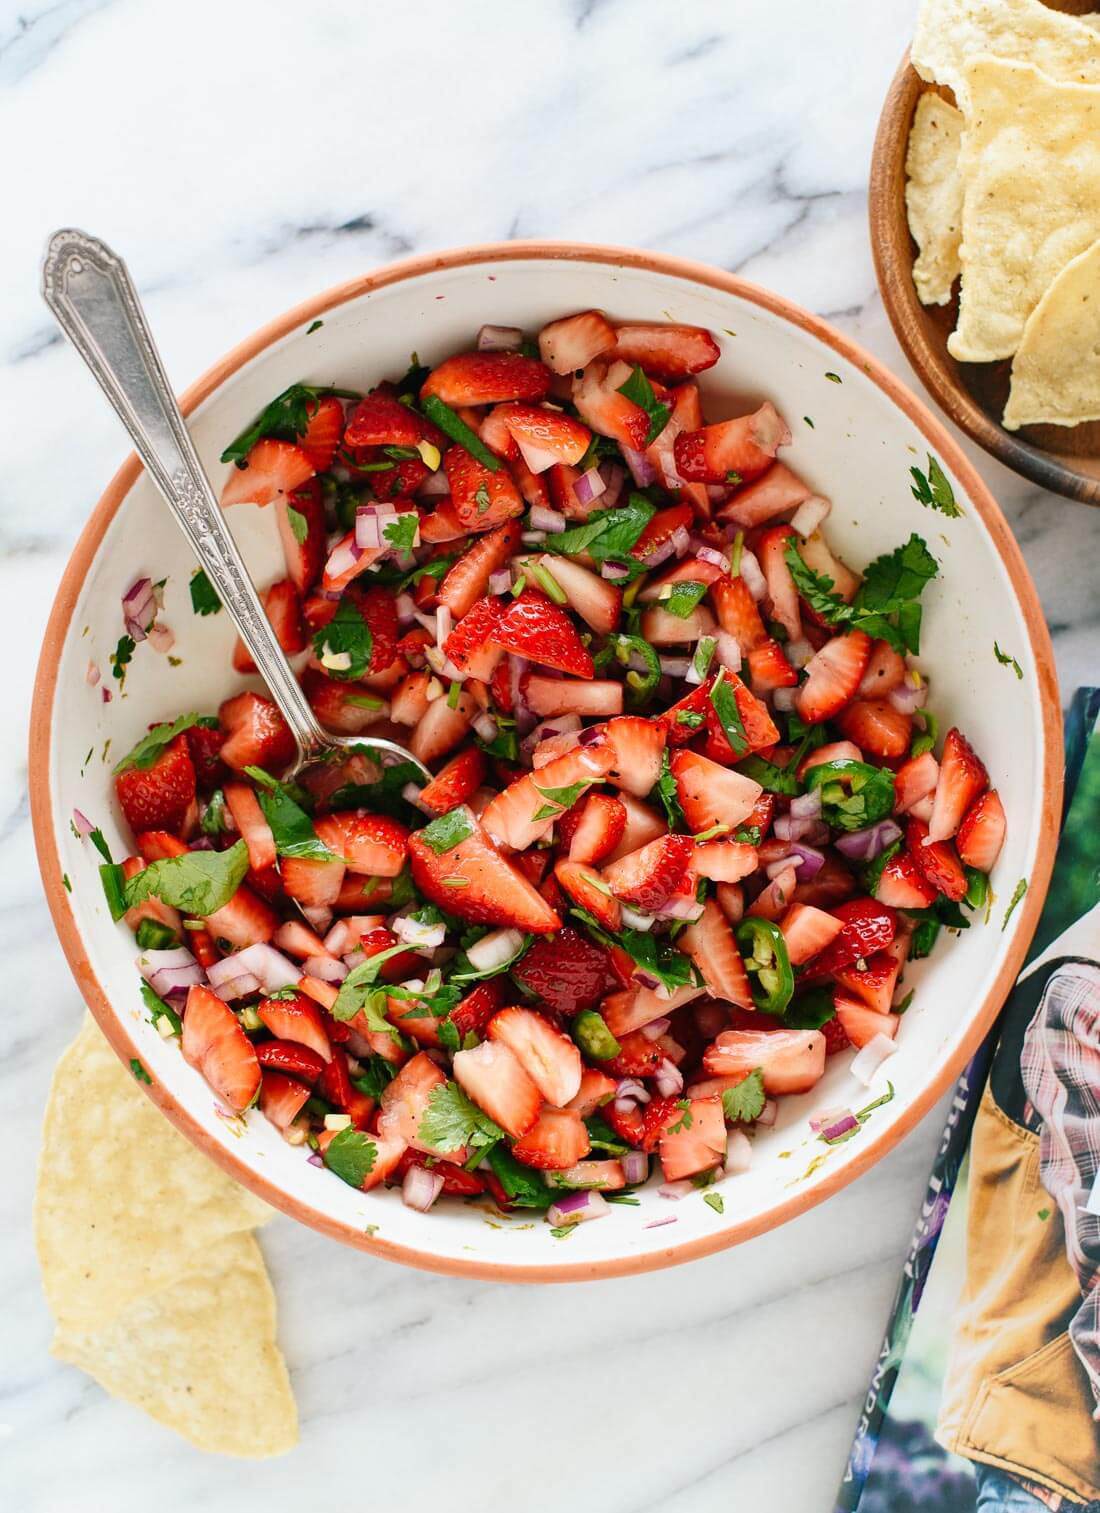 Have you had strawberry salsa yet? It's so good! Get the recipe at cookieandkate.com